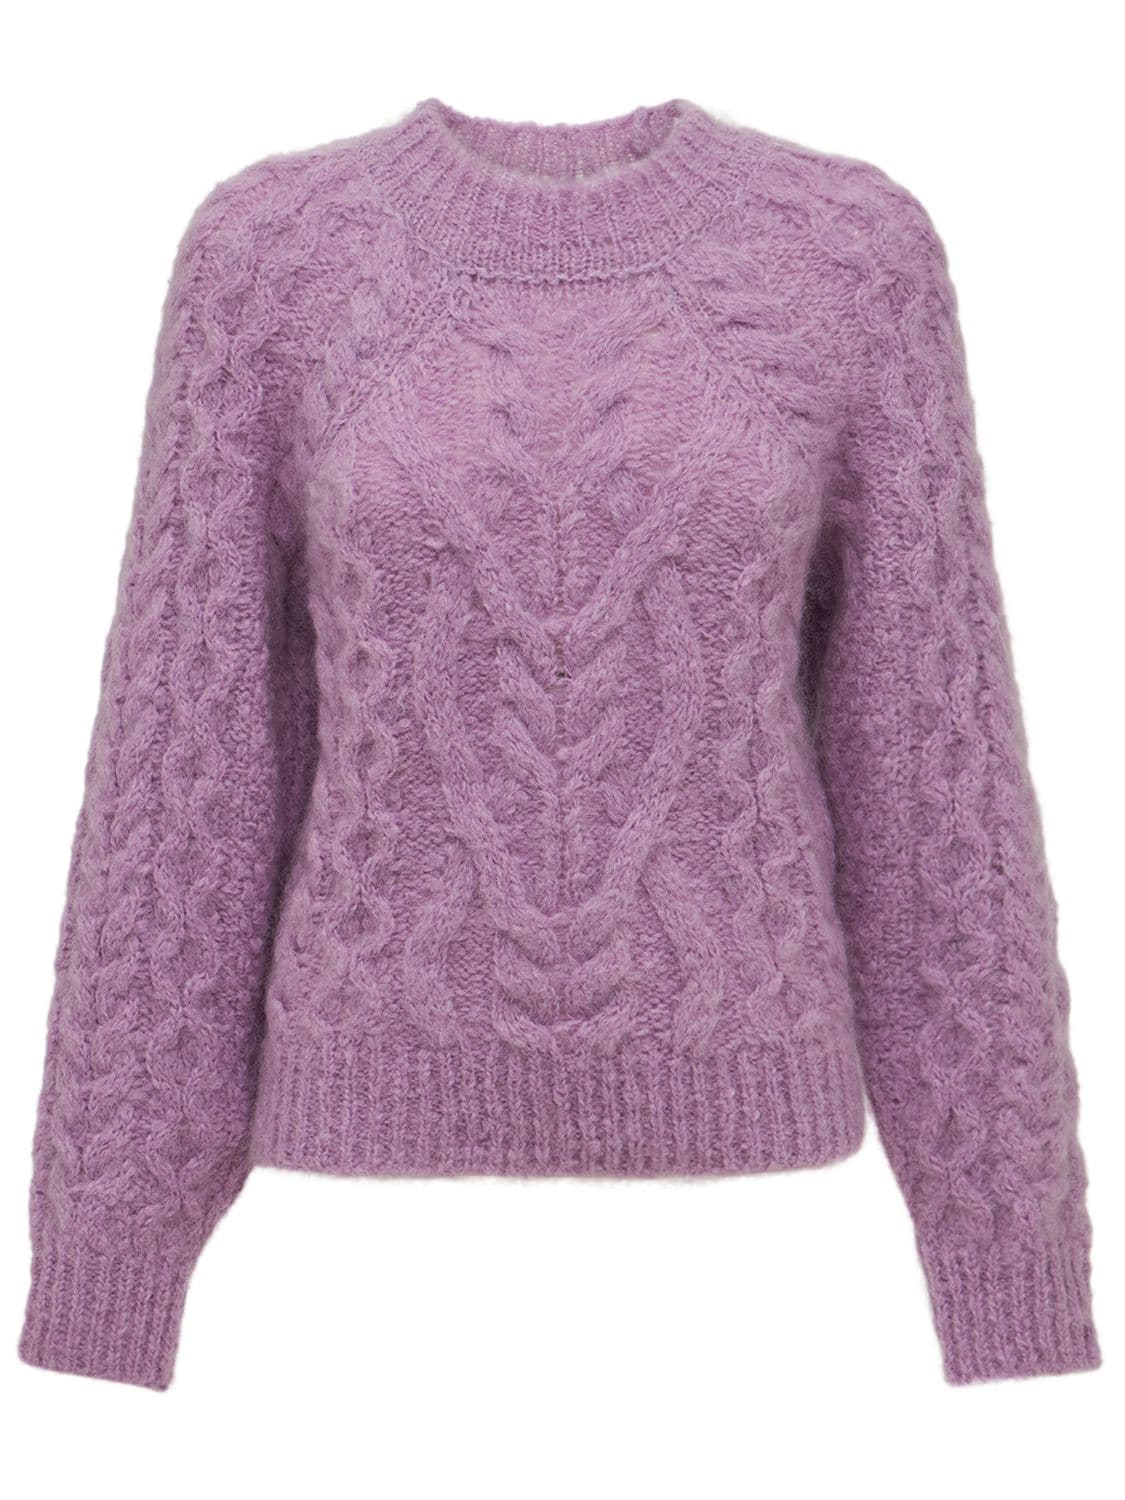 ISABEL MARANT Enery Mohair Blend Knit Sweater